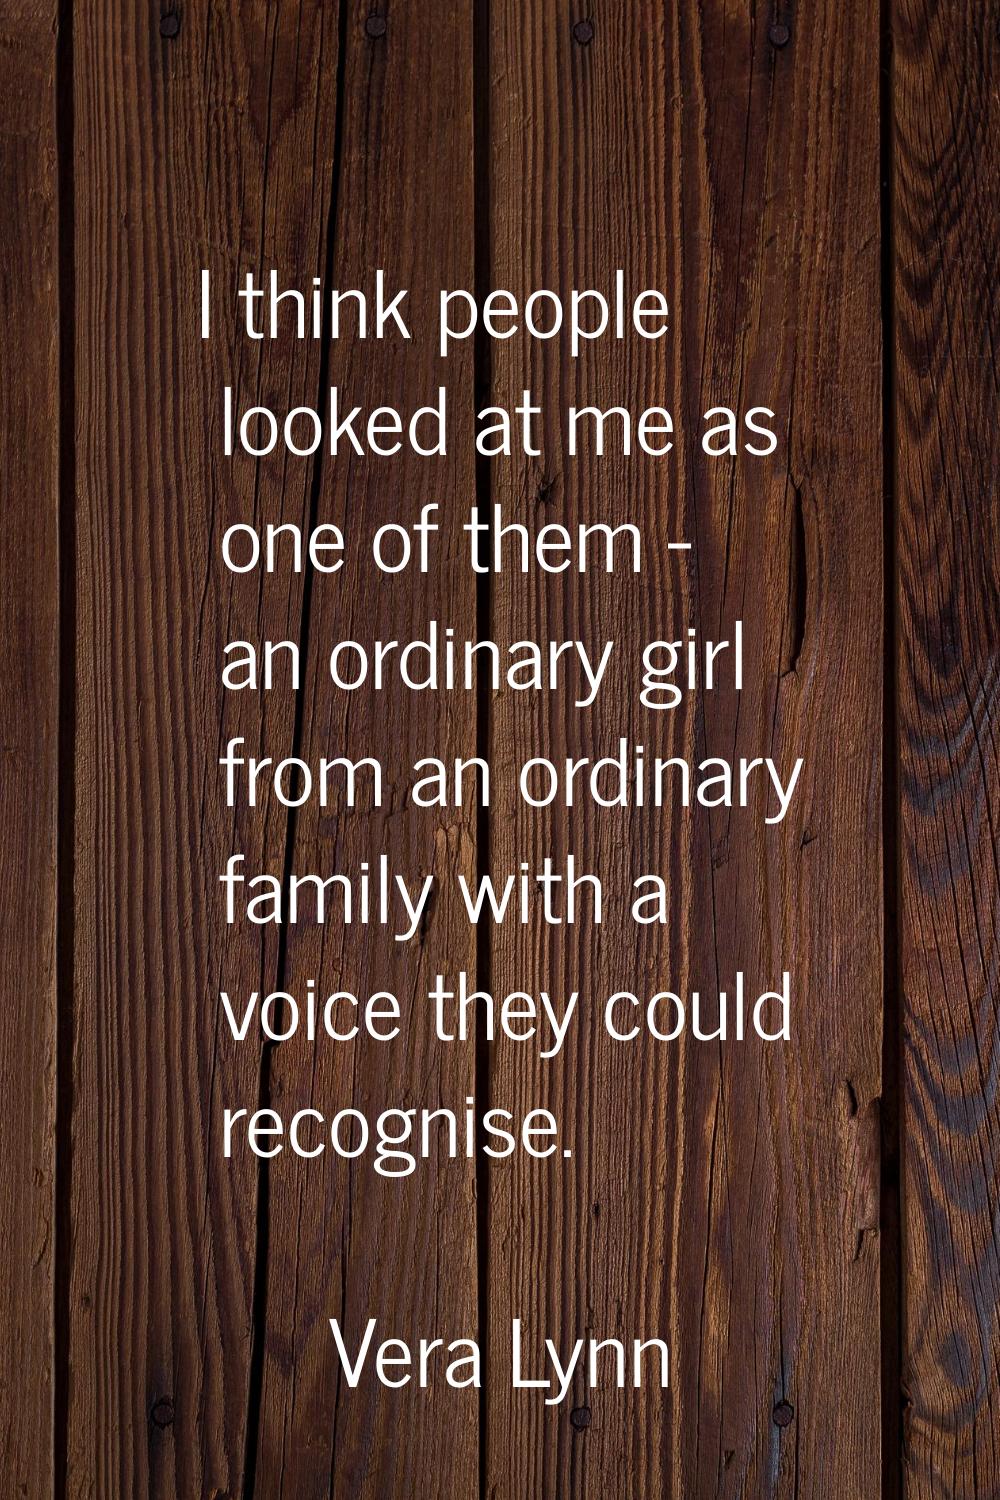 I think people looked at me as one of them - an ordinary girl from an ordinary family with a voice 